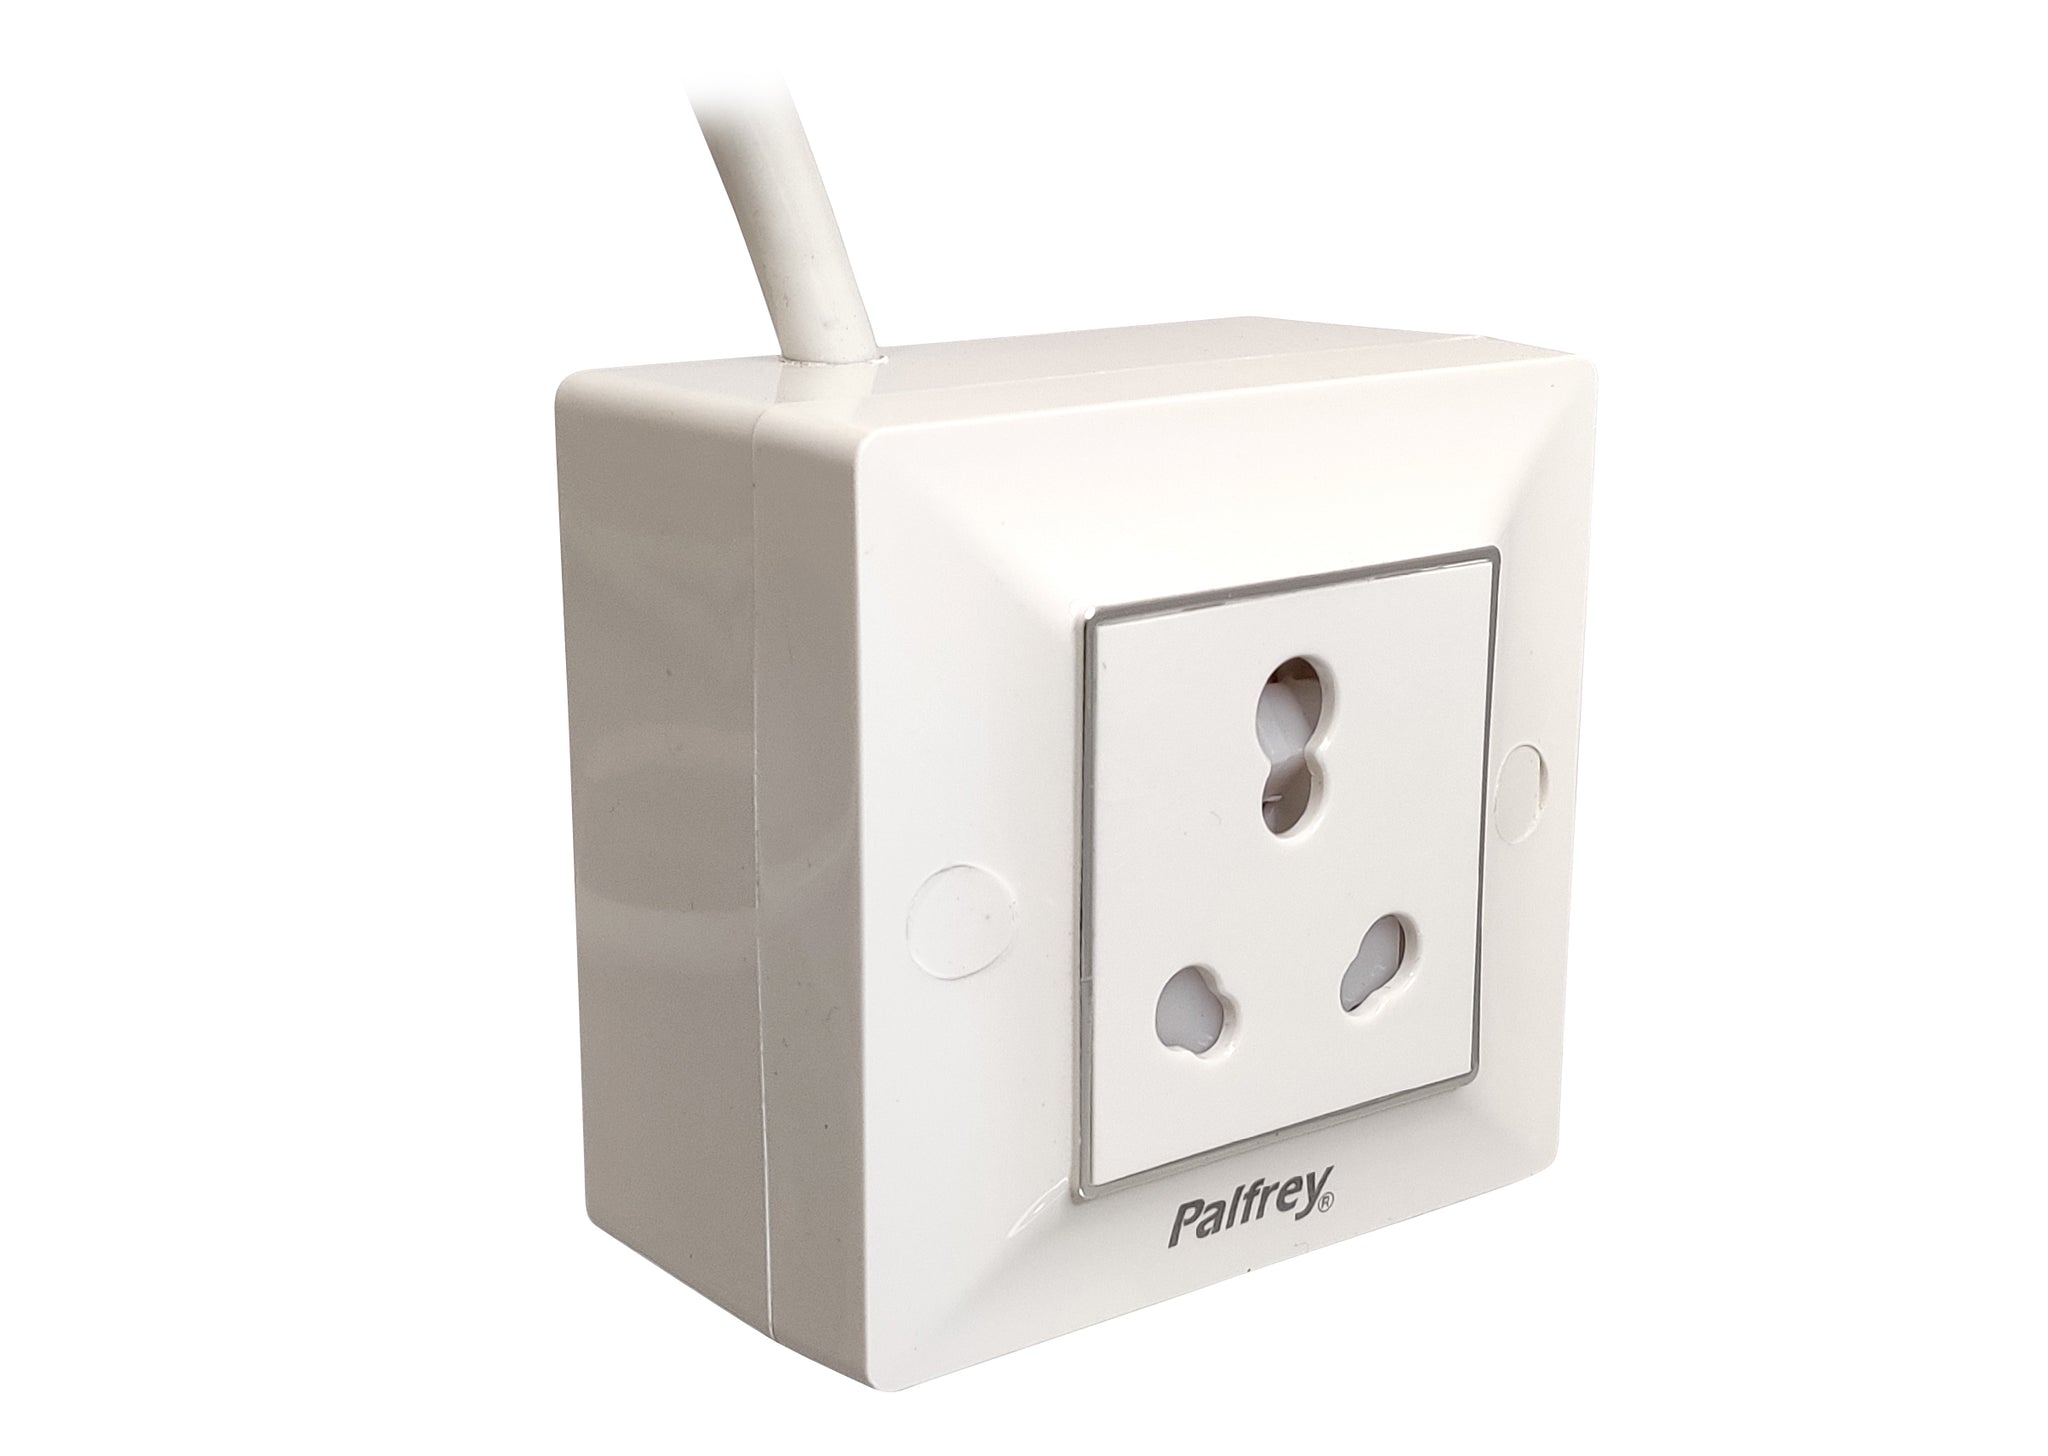 Palfrey Electric Extension Board - 16A Socket with 2.5 mm Heavy Duty Wire (White)